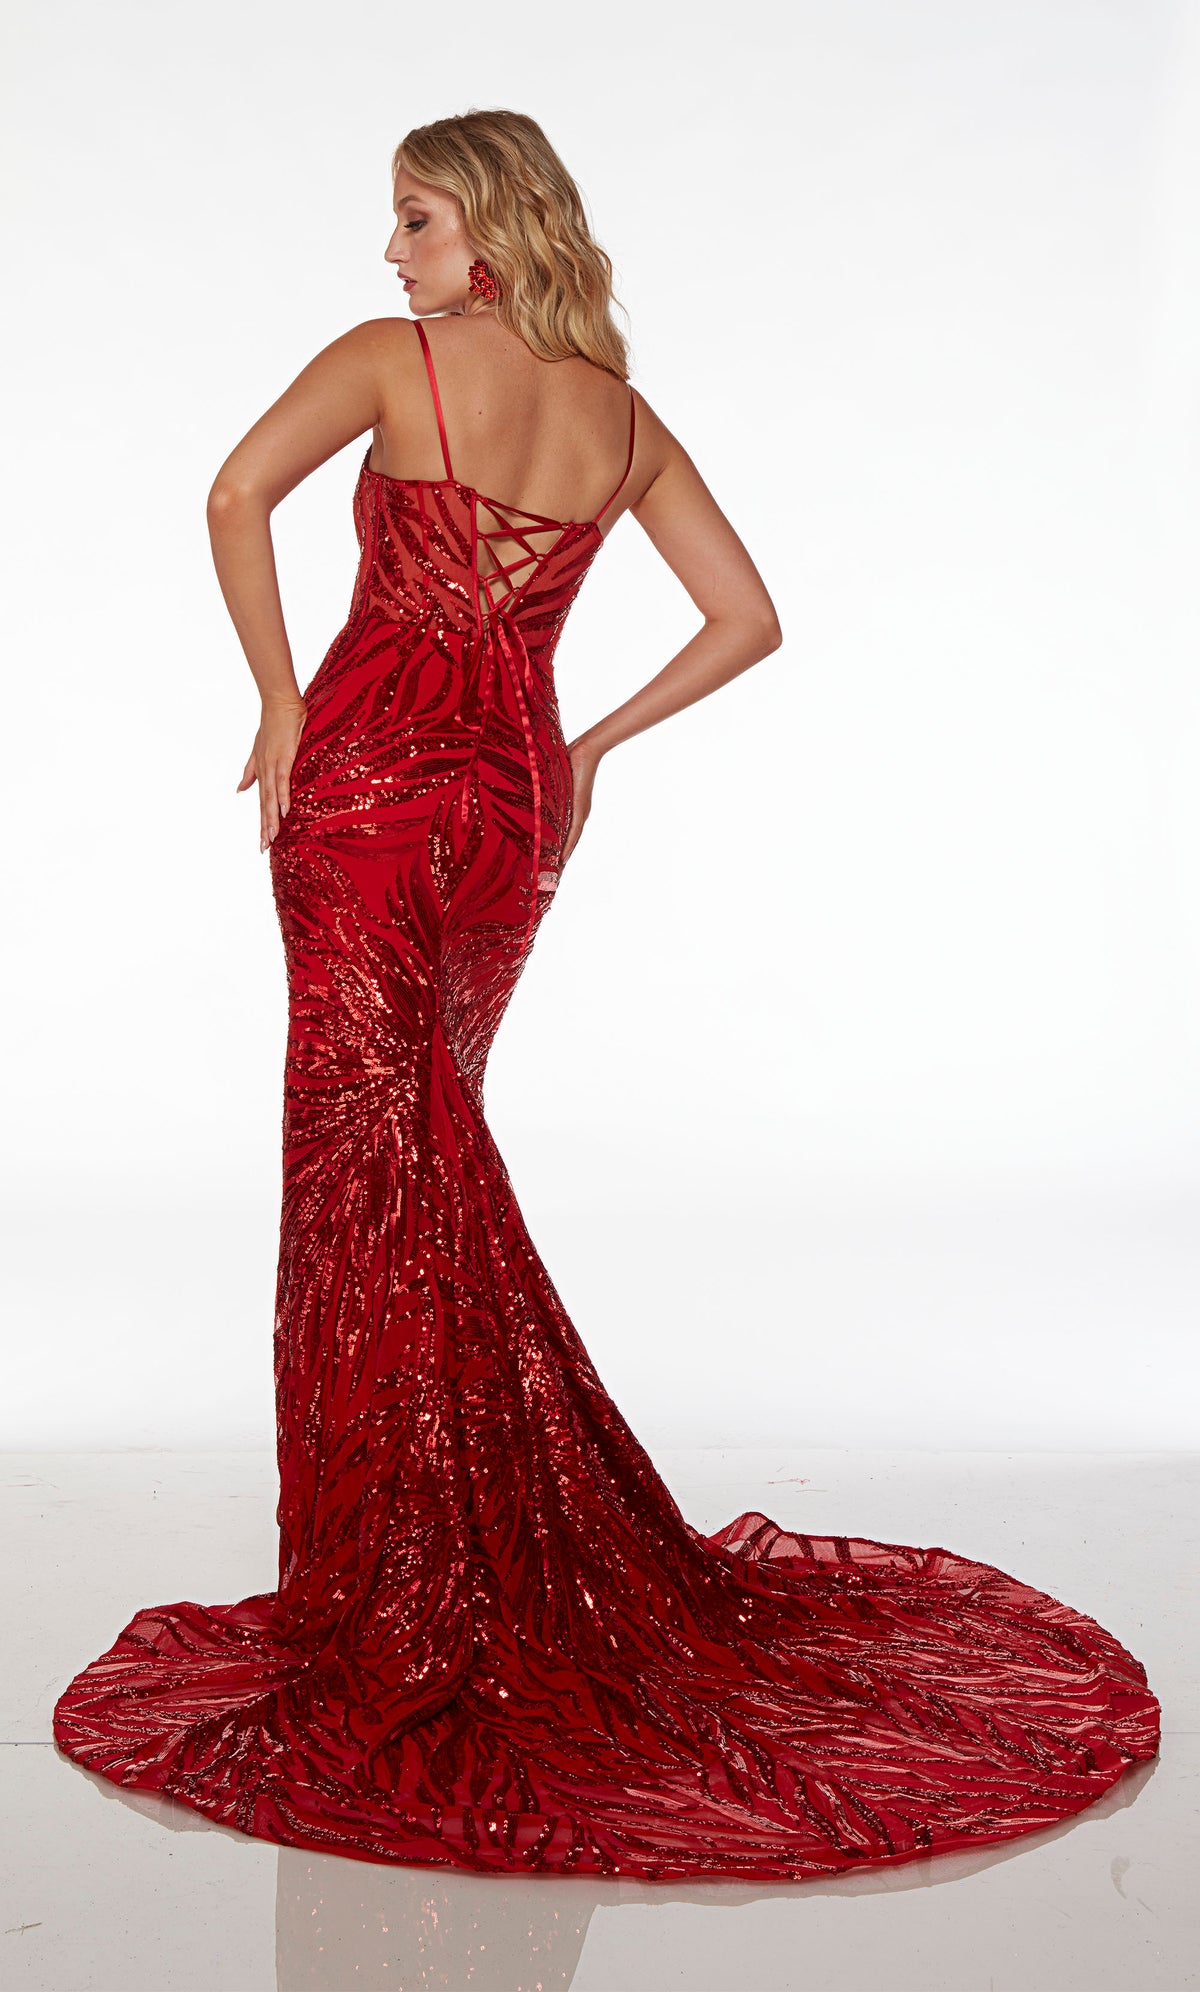 Red prom dress with an plunging neckline, spaghetti straps, lace-up back, train, and an unique sequin design throughout for an refreshing and stylish look.